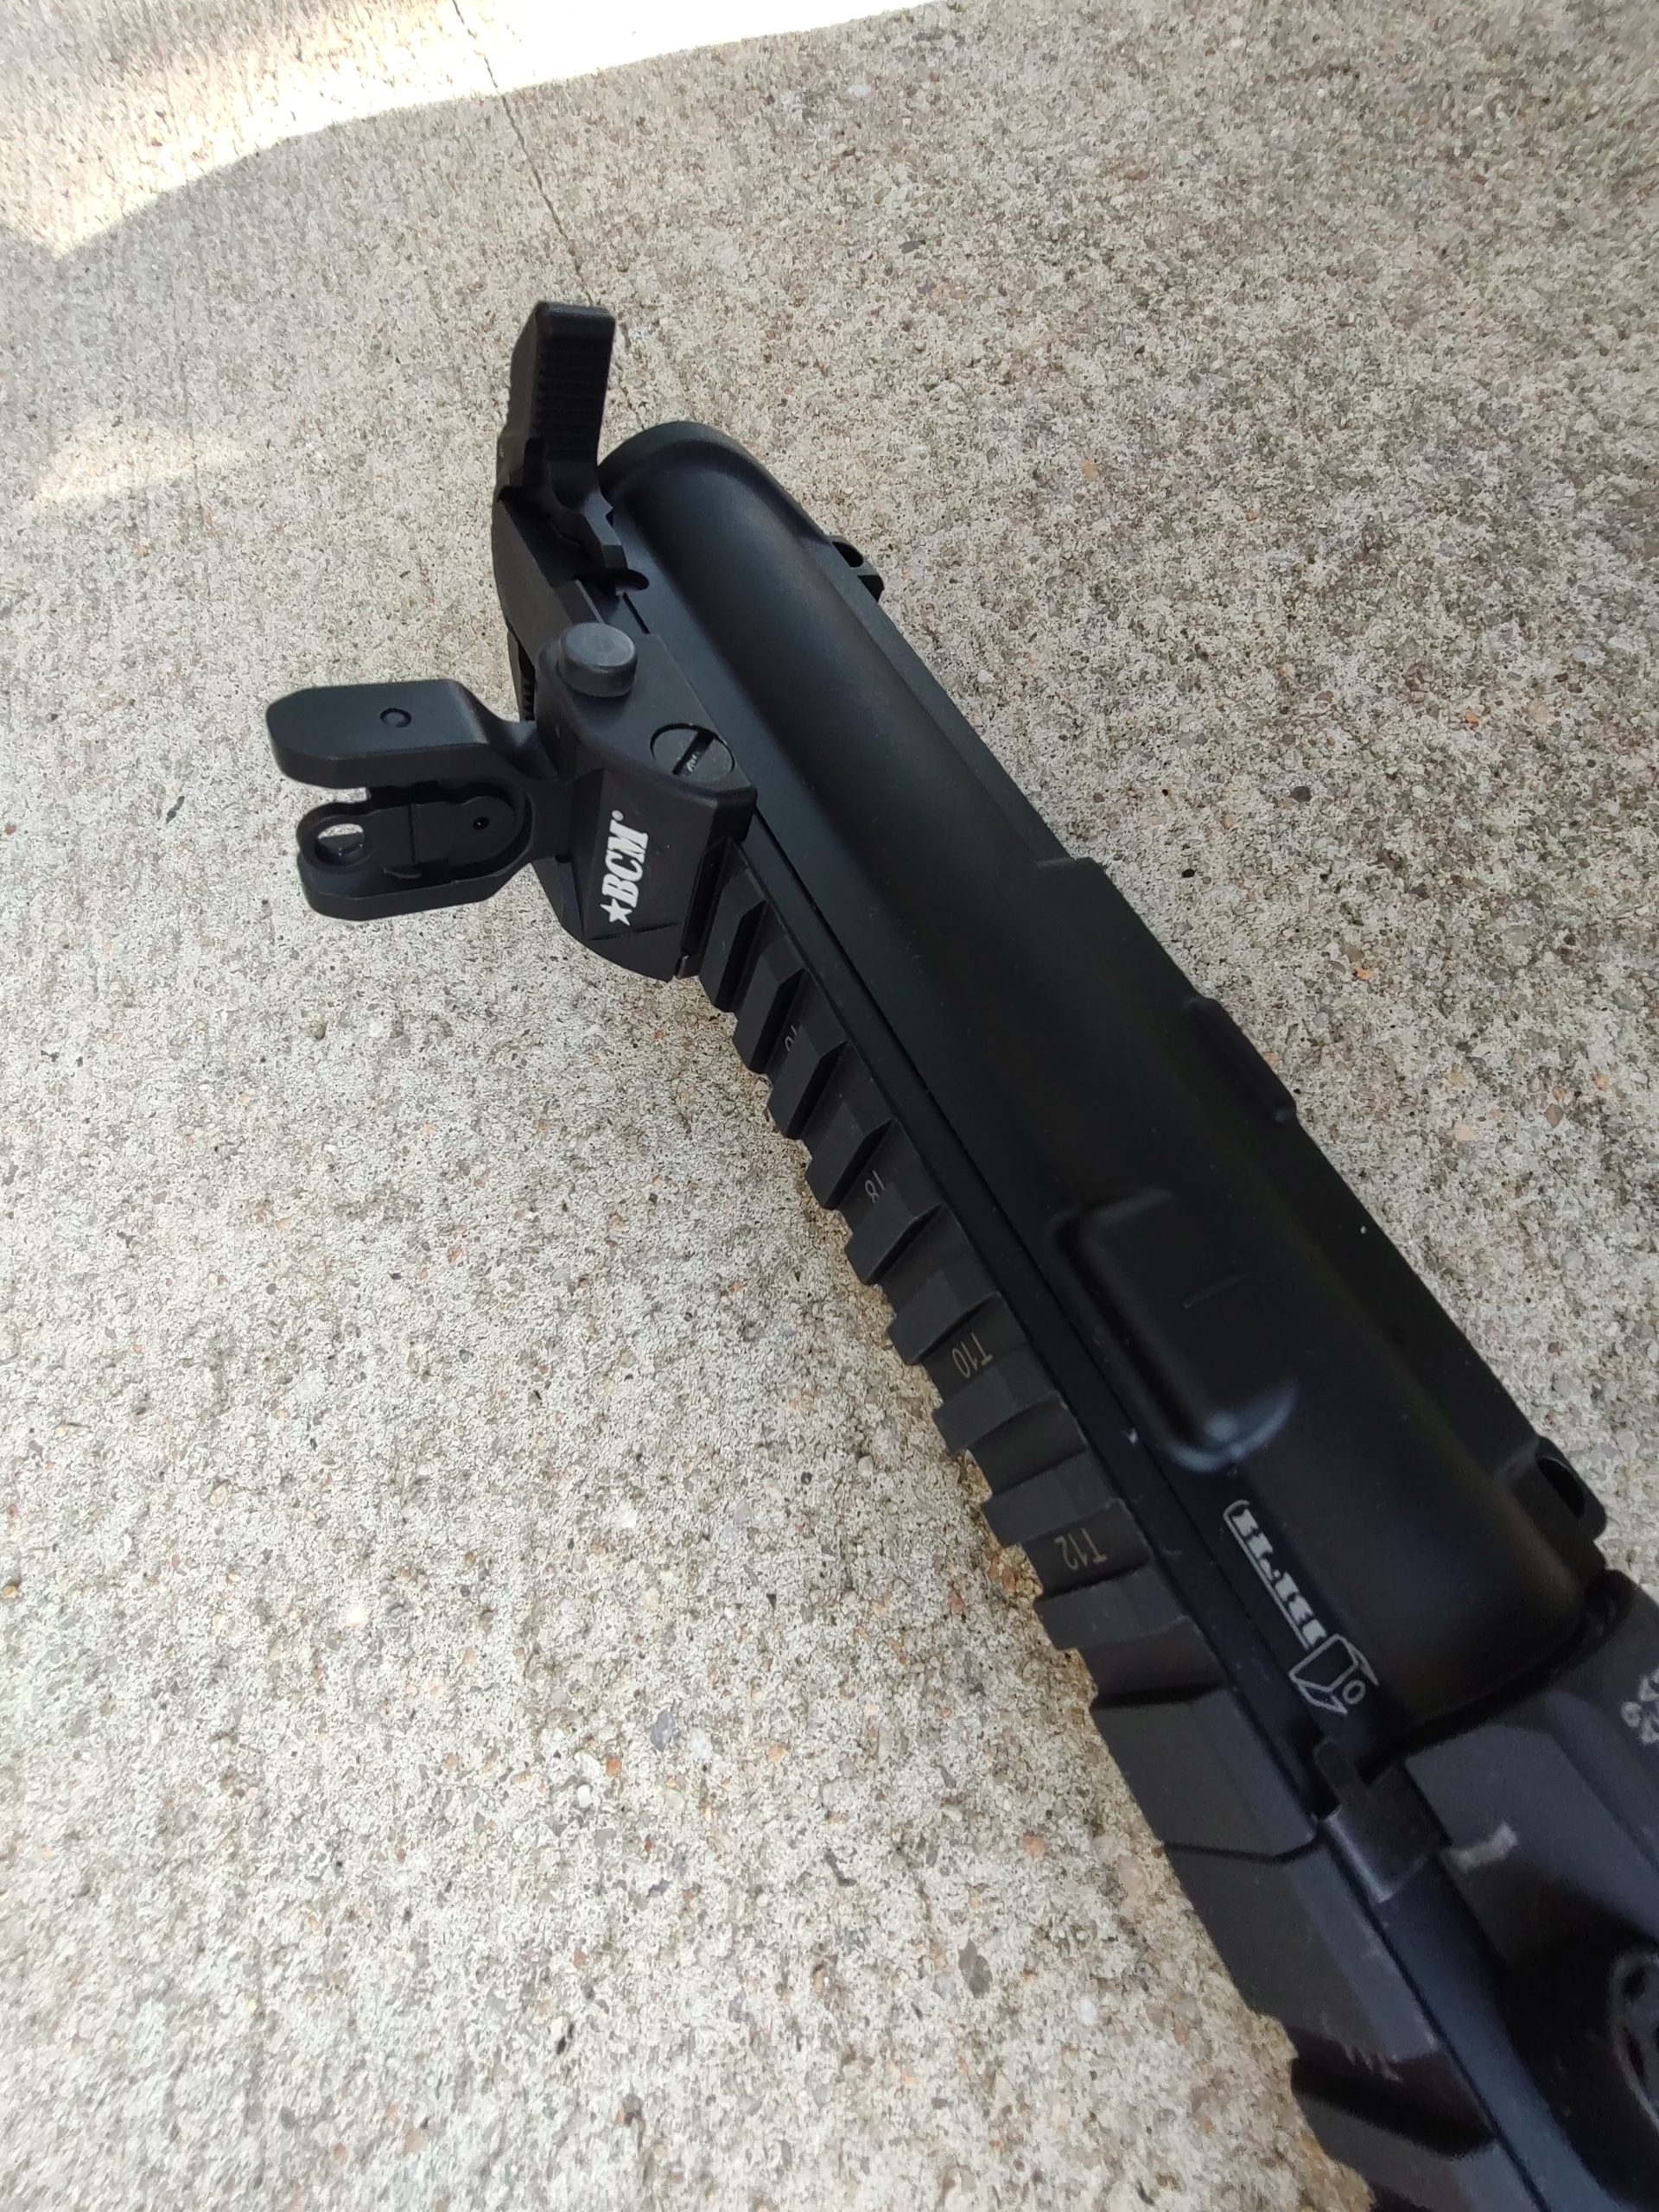 A close-up view of a BCM® COMPLETE 16" CHF Mid Length Complete Upper Receiver Group w/ MCMR-9 Handguard - New Old Stock - Minor Handling Marks attached to a rail mount on a concrete surface, with iron sights flipped up.